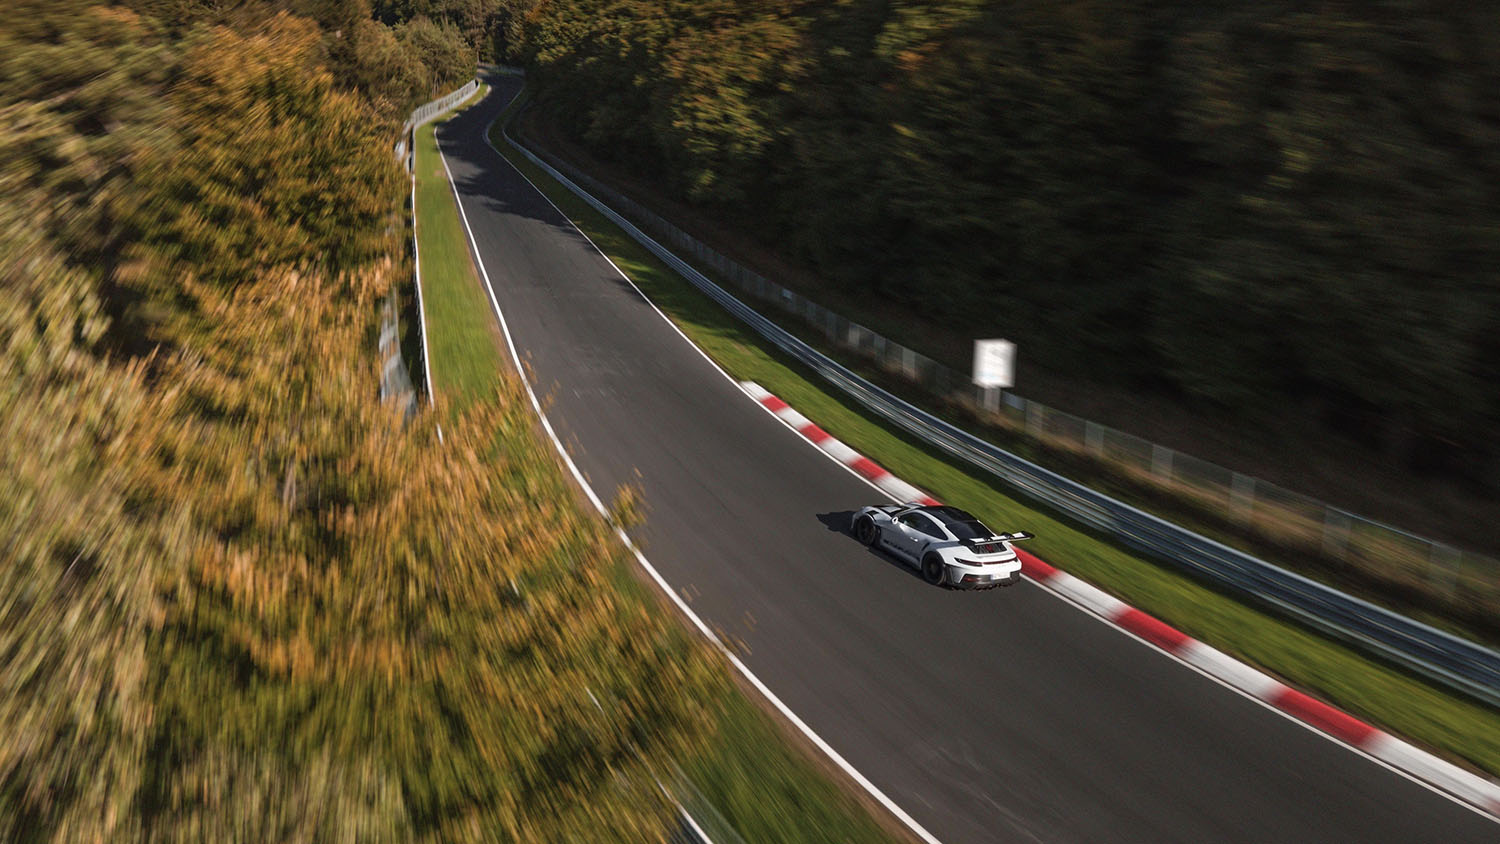 Long-distance three-quarters shot of a Porsche 911 GT3 RS driving on the Nundefinedrburgring